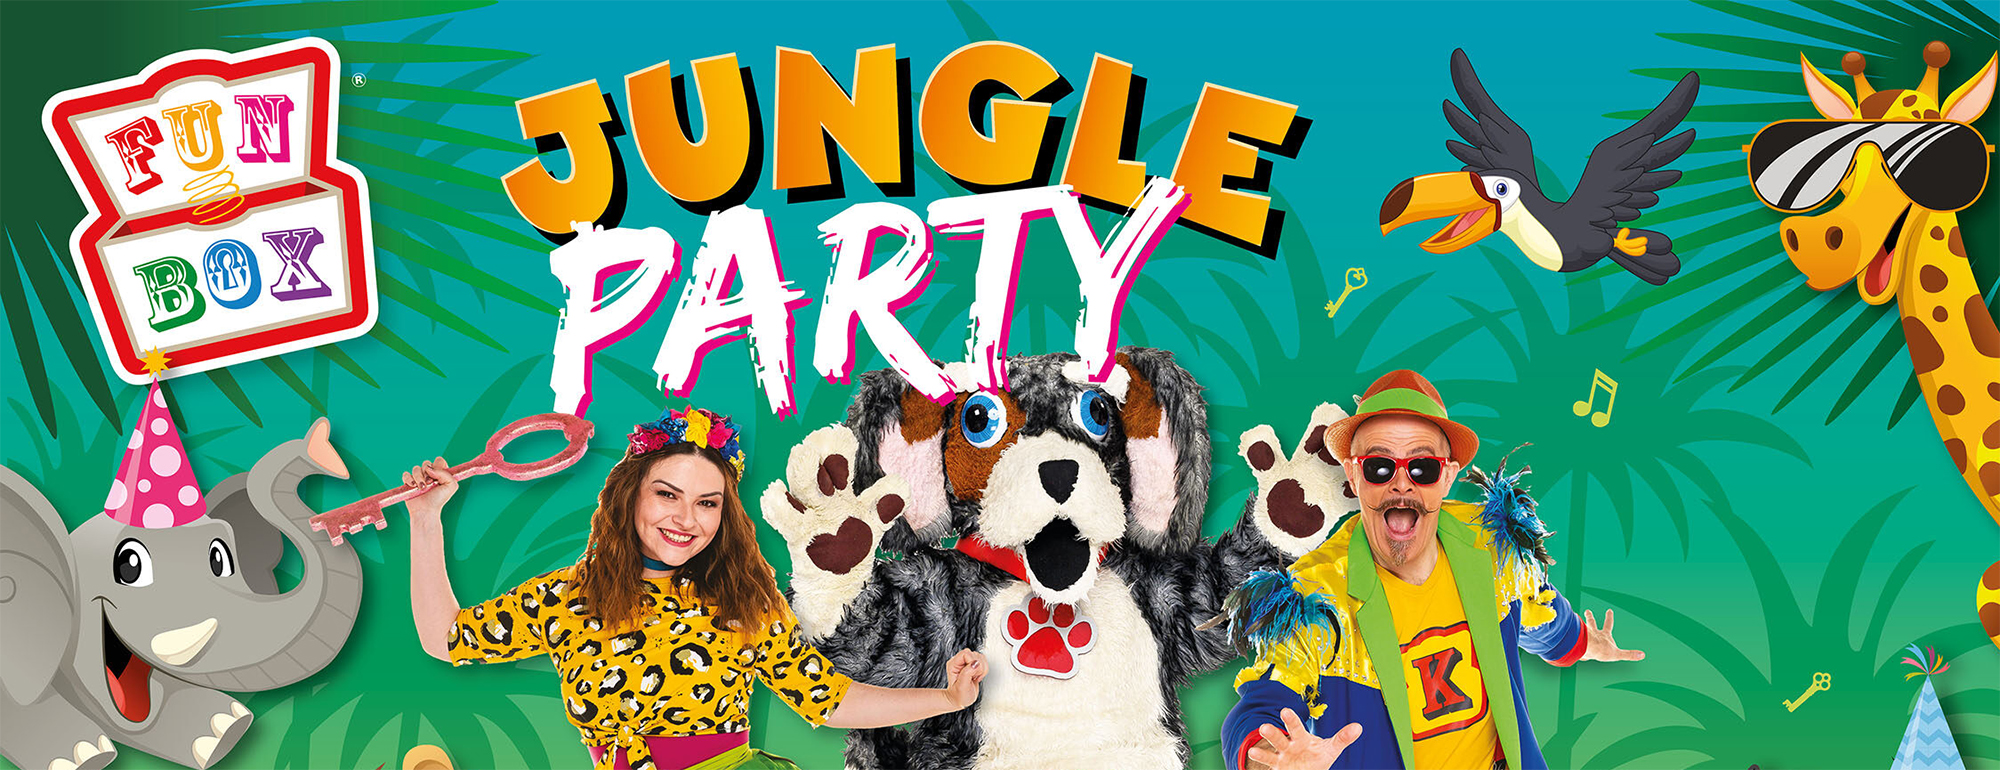 Funbox Presents: Jungle Party | Aberdeen Performing Arts